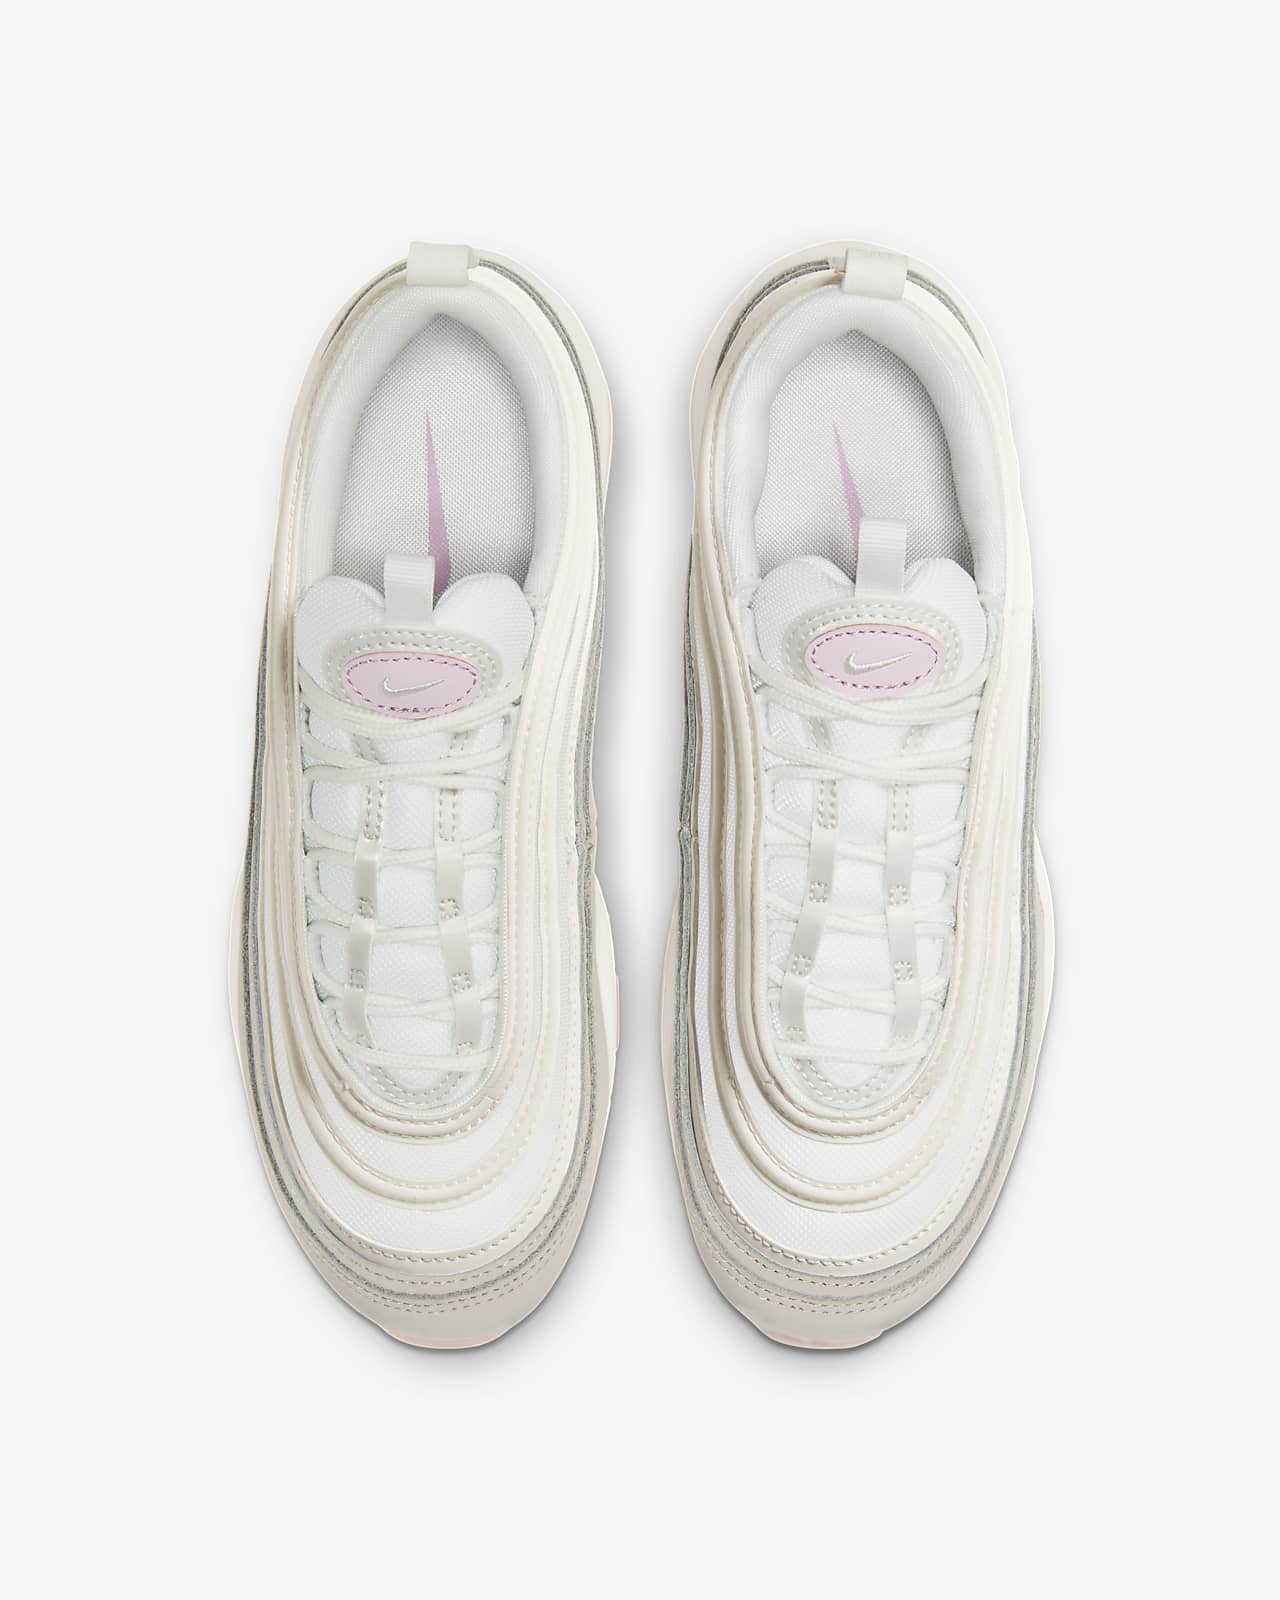 air max 97 light pink and white